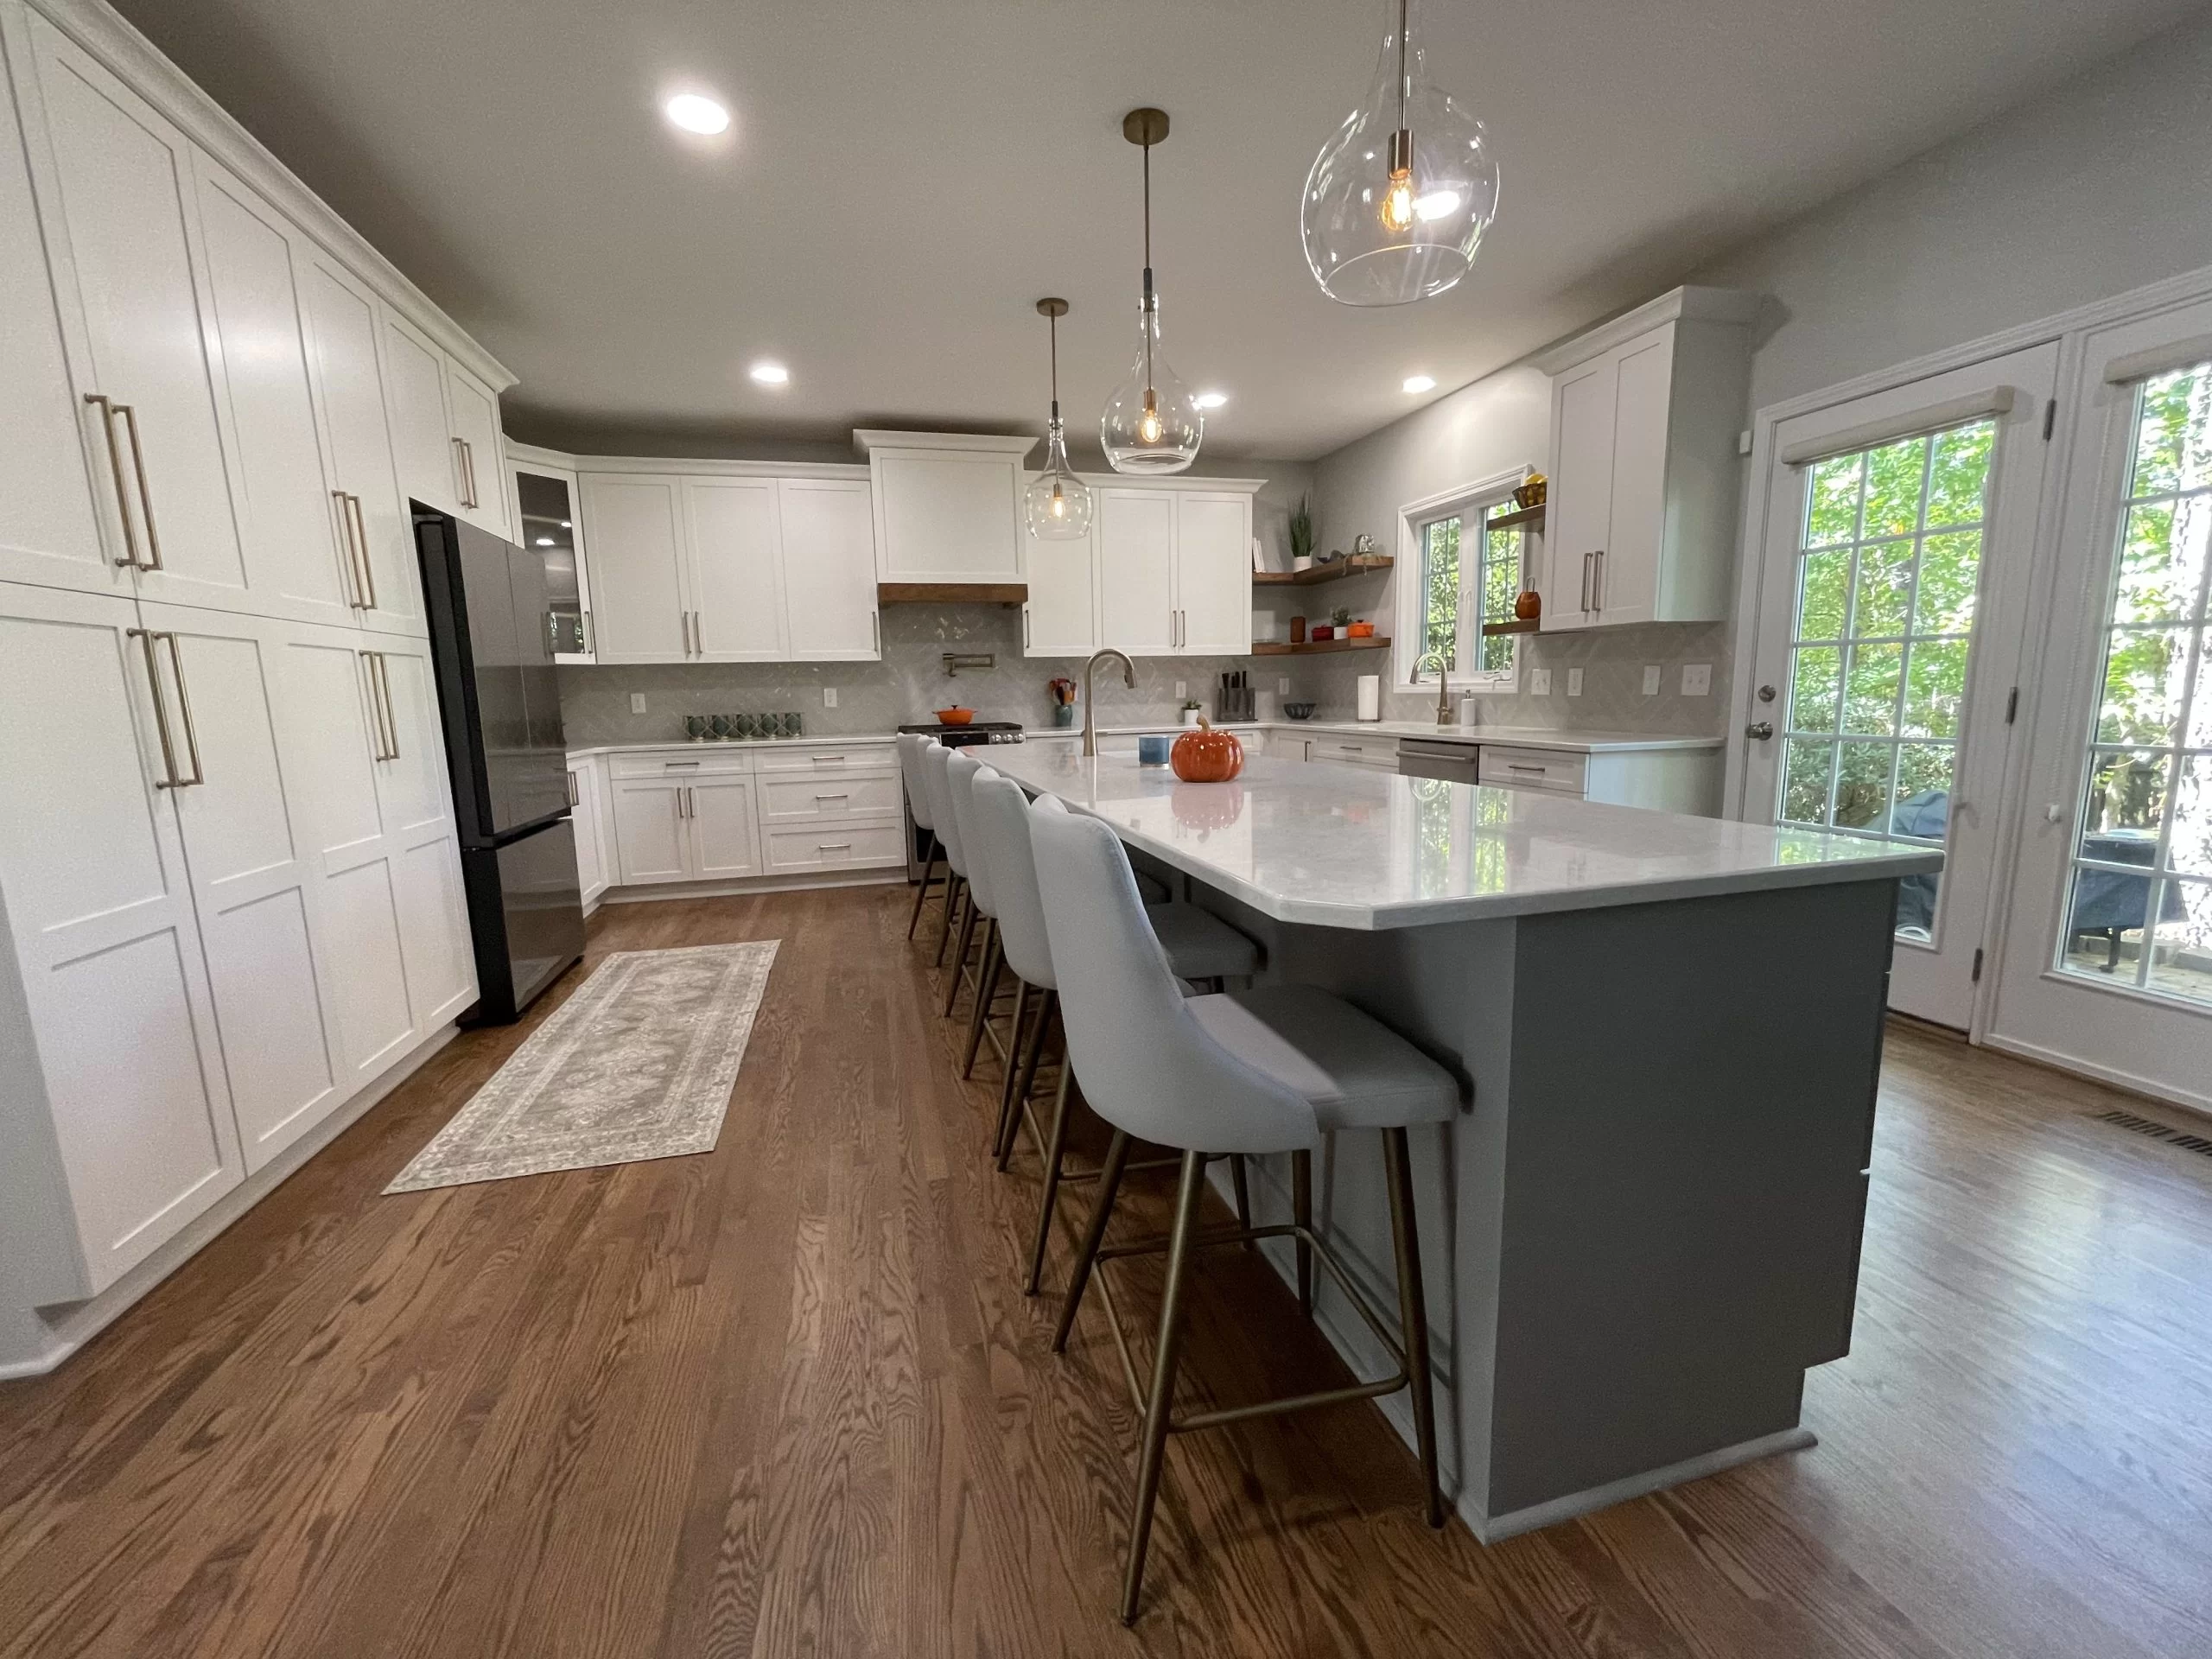 Open and bright new kitchen remodel by Riverbirch of Raleigh